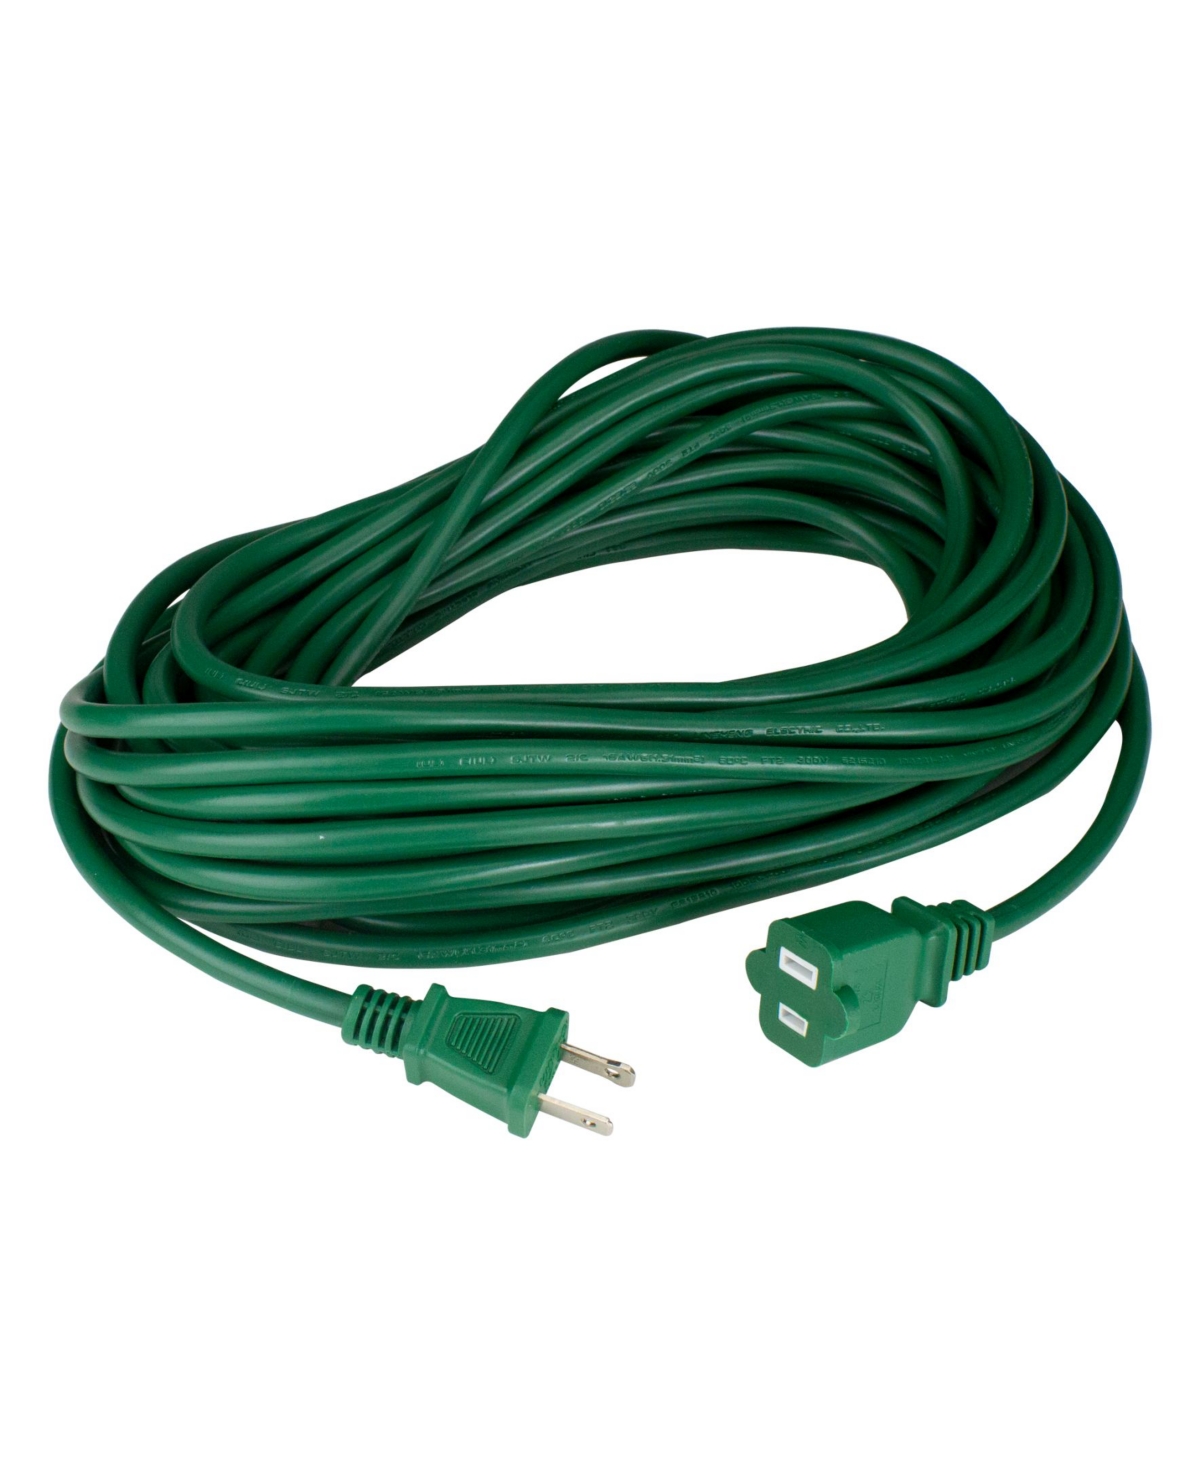 40' 2-Prong Outdoor Extension Power Cord with End Connector - Multi-Colored